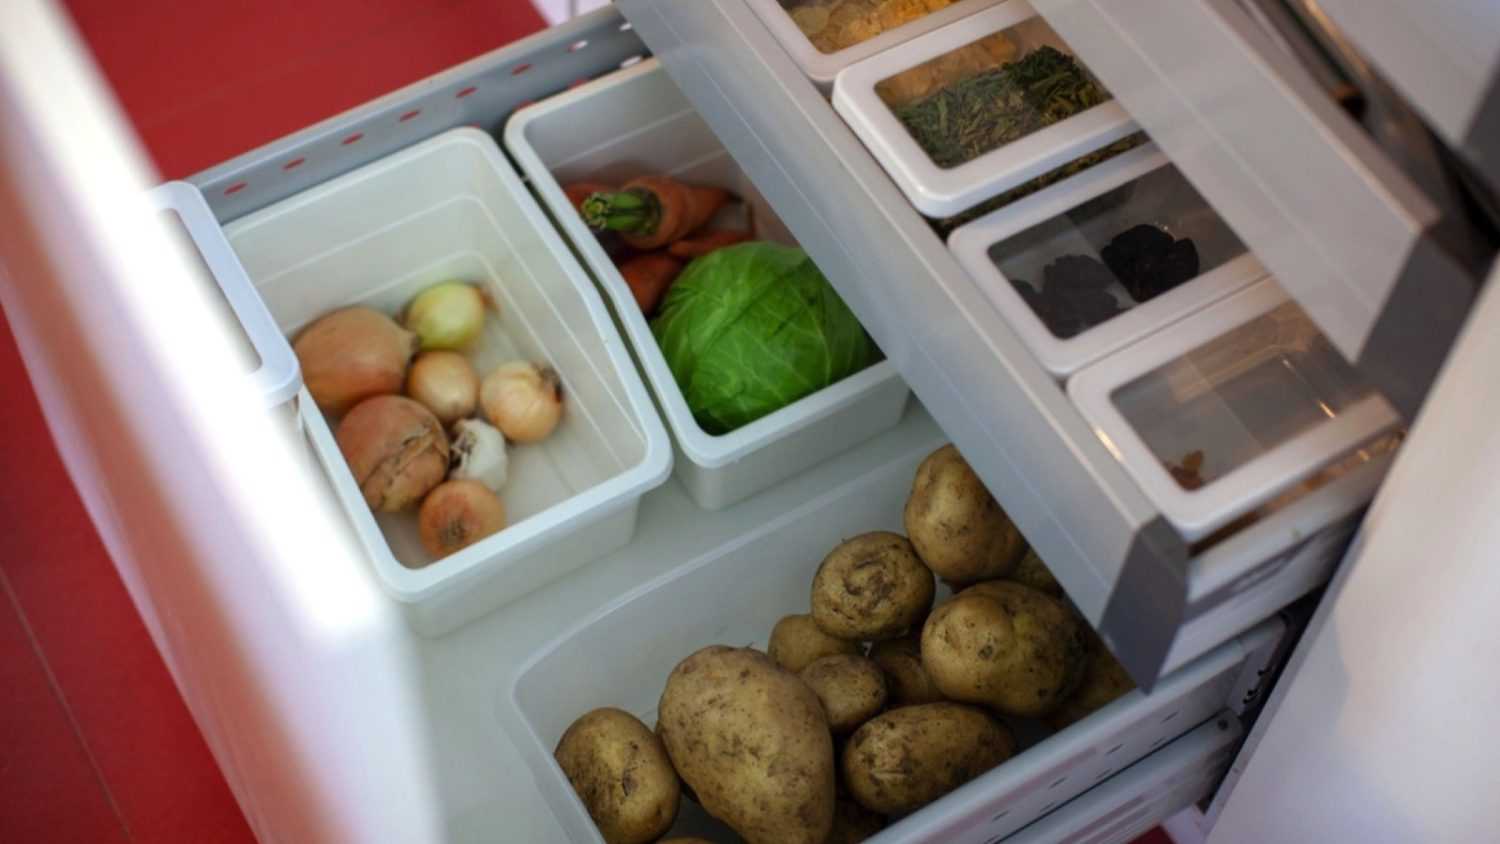 Storing vegetables in crates